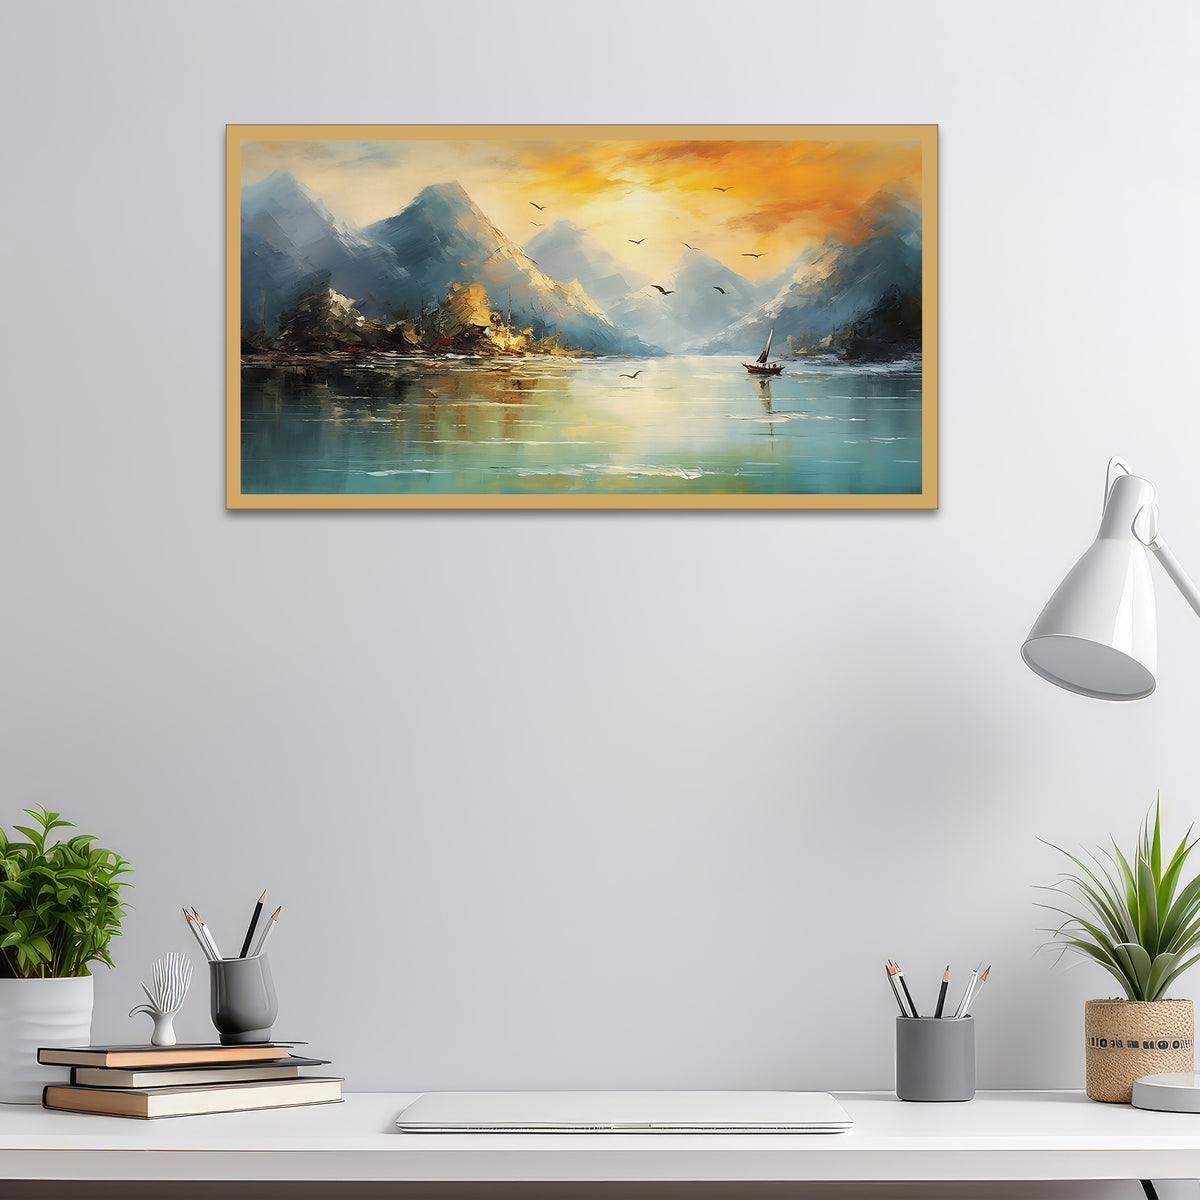 Abstract Golden Mountain Modern Floating Frame Canvas Wall Painting